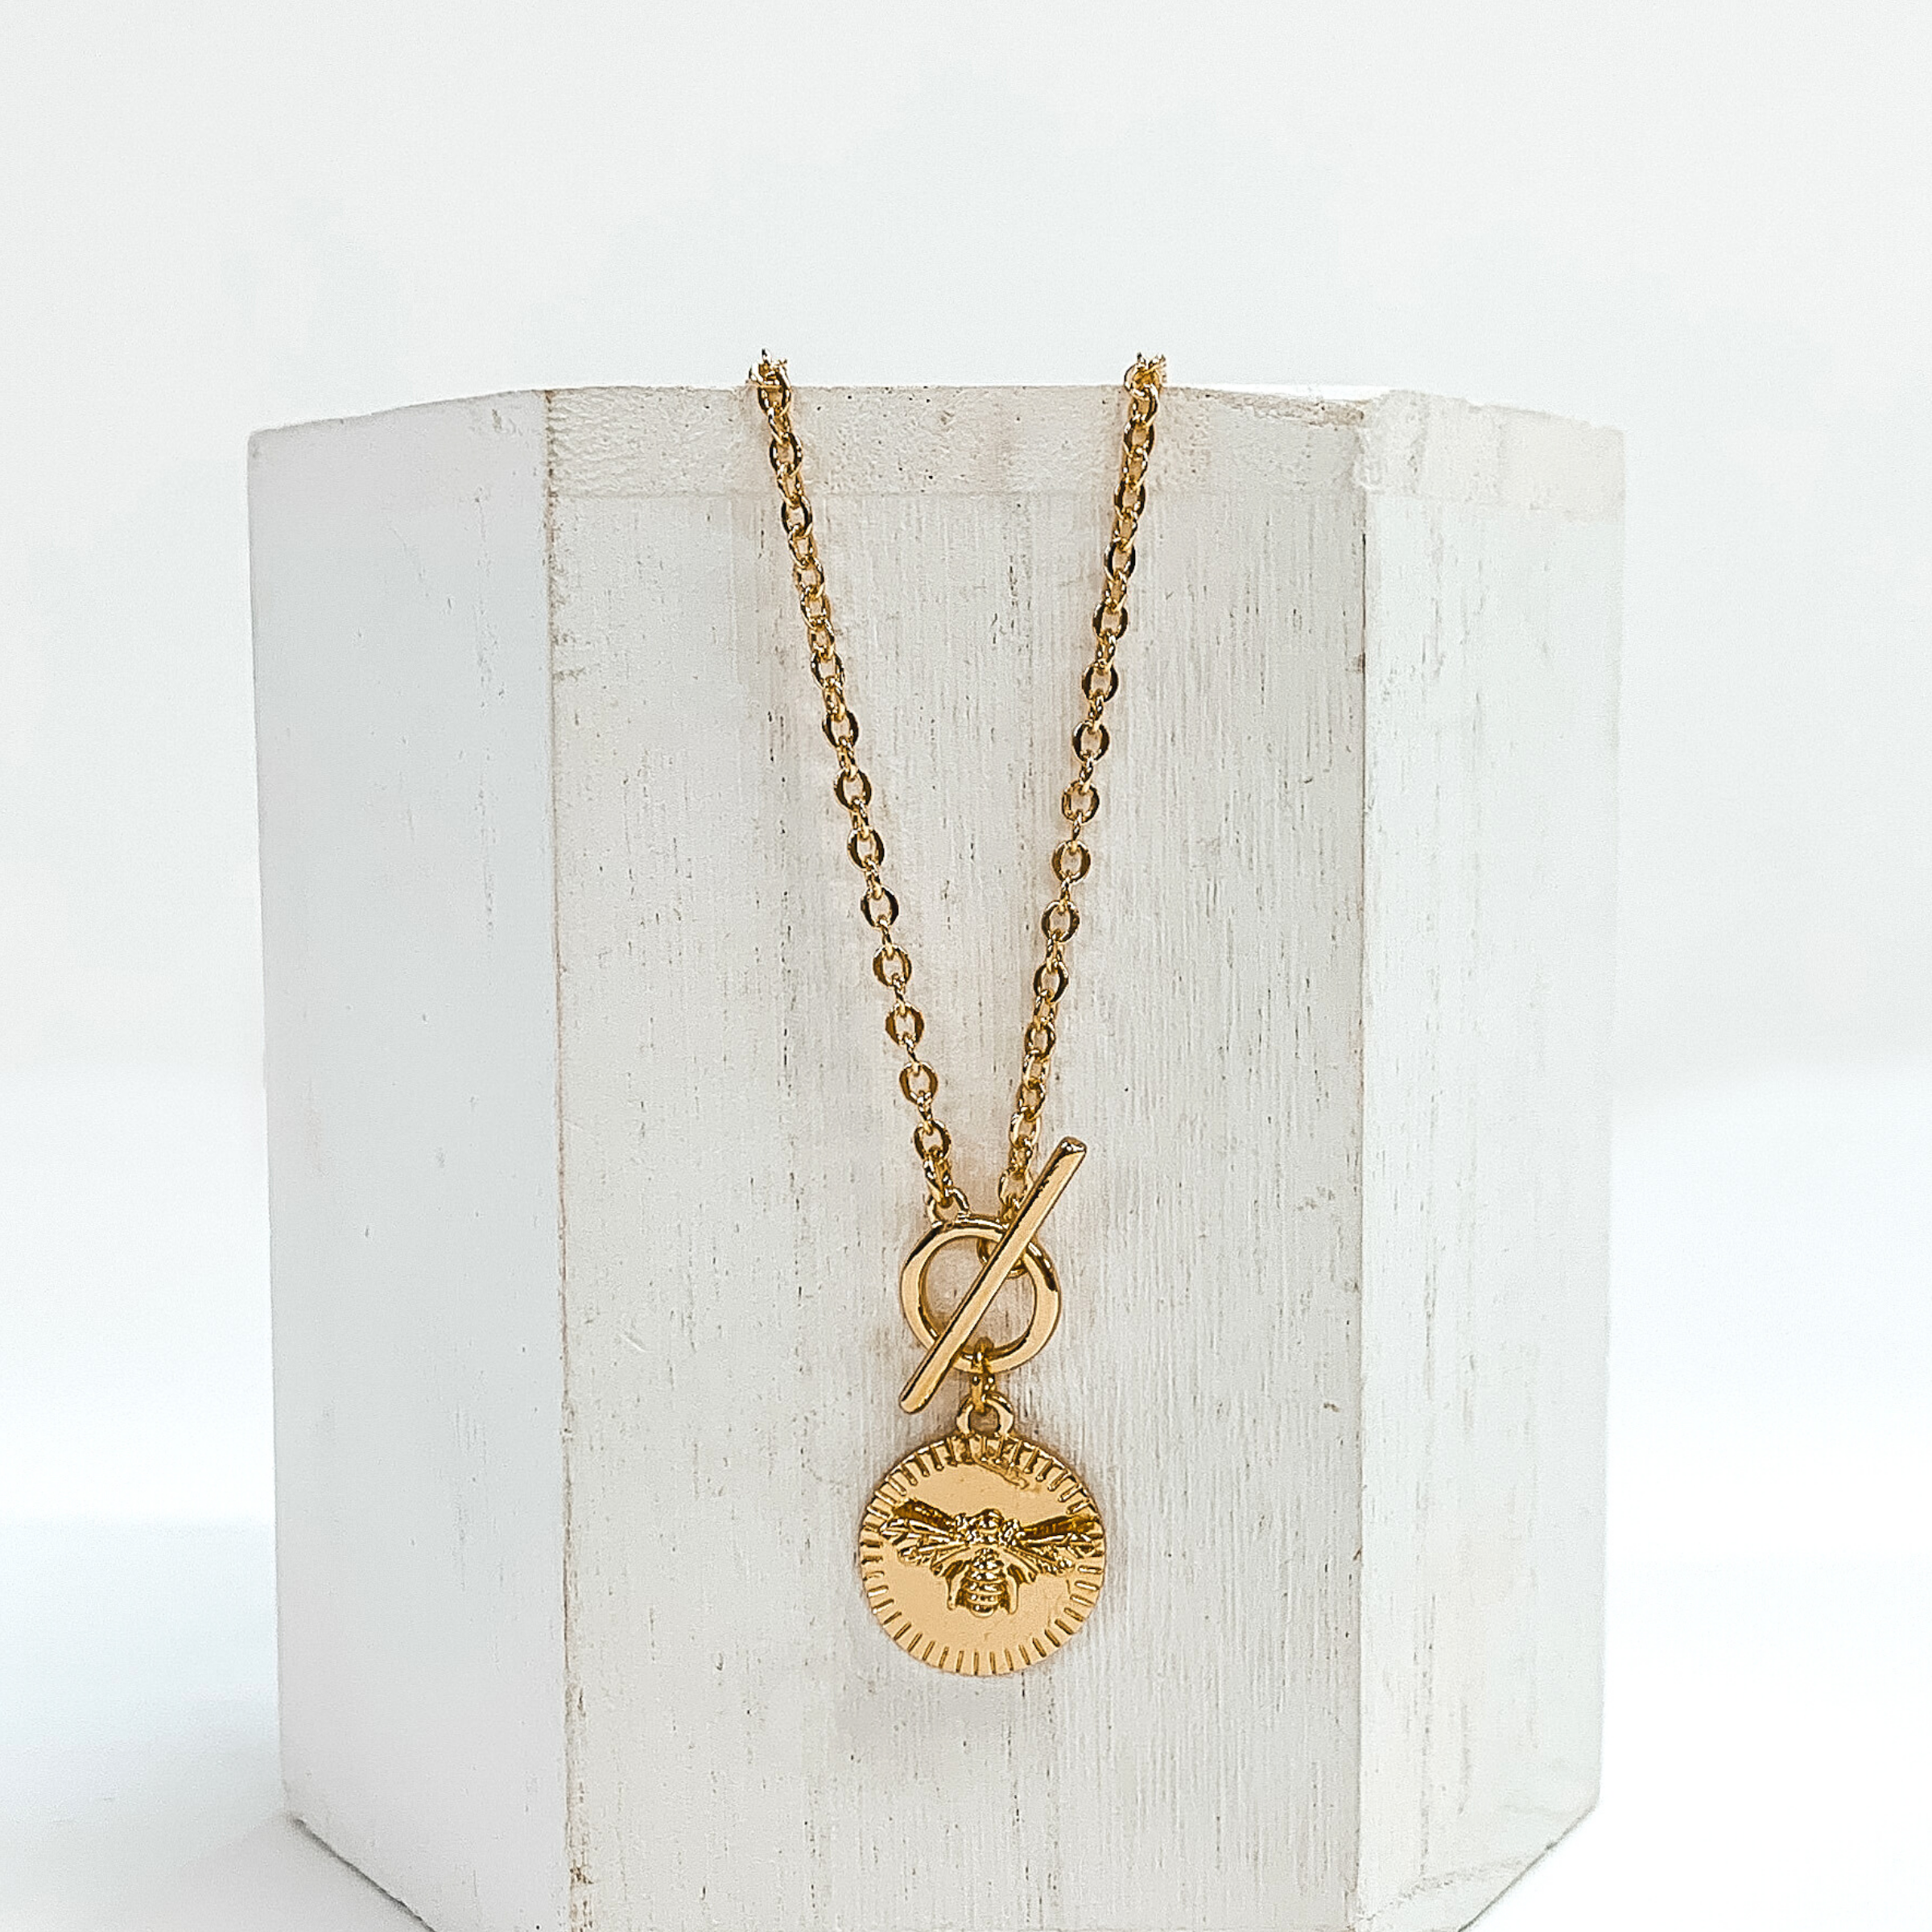 This is a gold necklace that has a front toggle clasp and a circle pendant with a bumble bee charm. This necklace is pictured laying on a white block and on a white background.